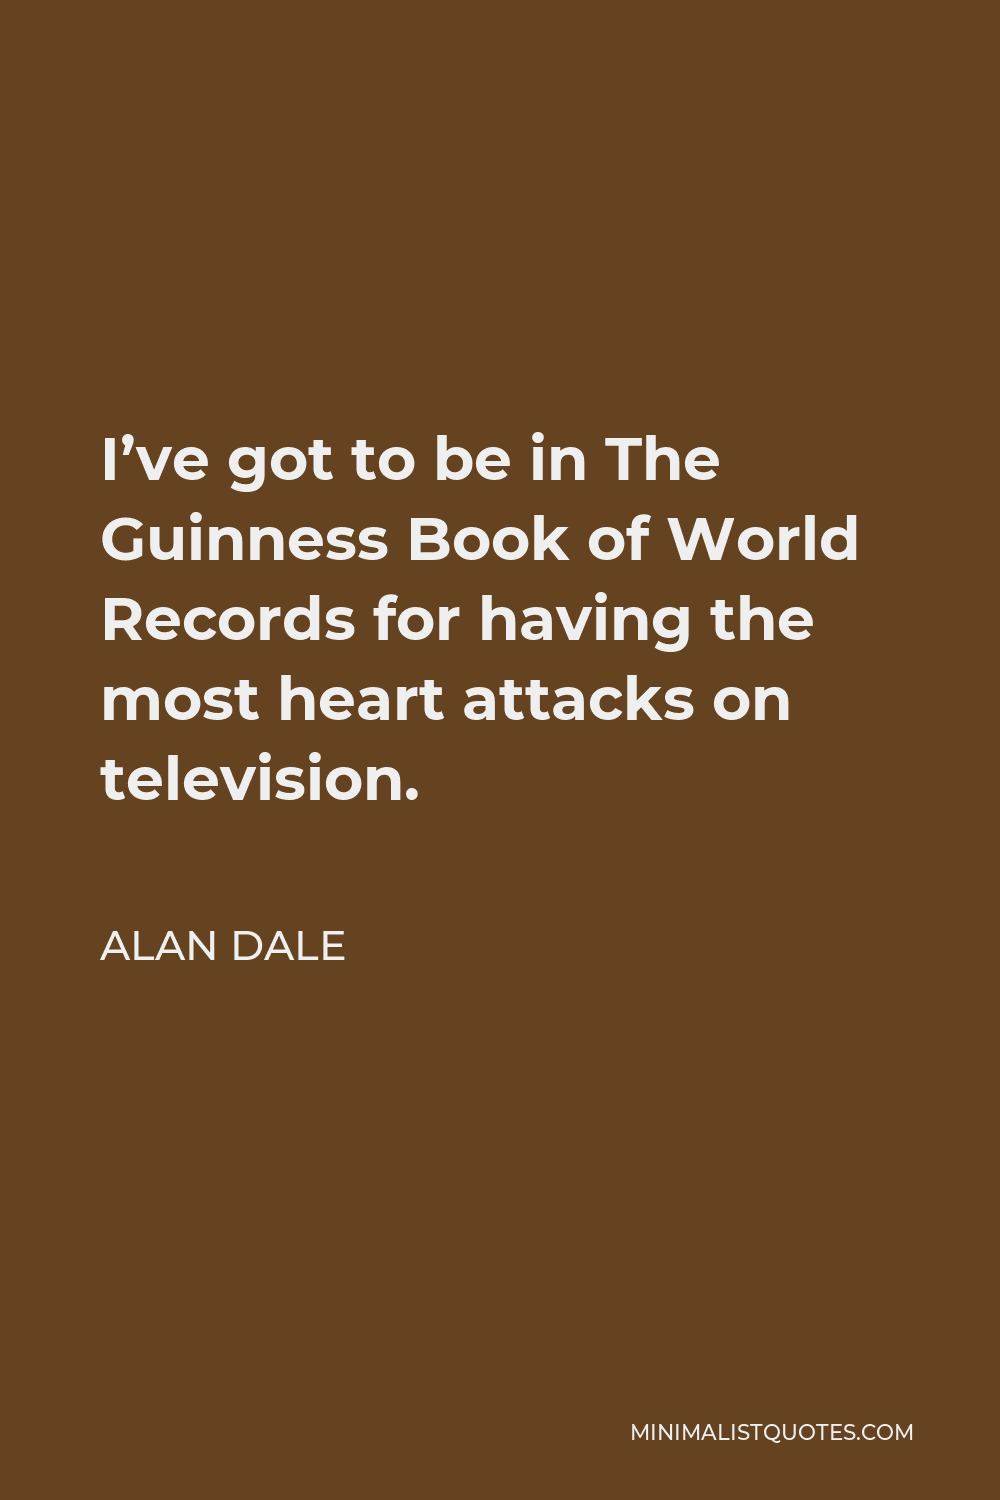 Alan Dale Quote - I’ve got to be in The Guinness Book of World Records for having the most heart attacks on television.